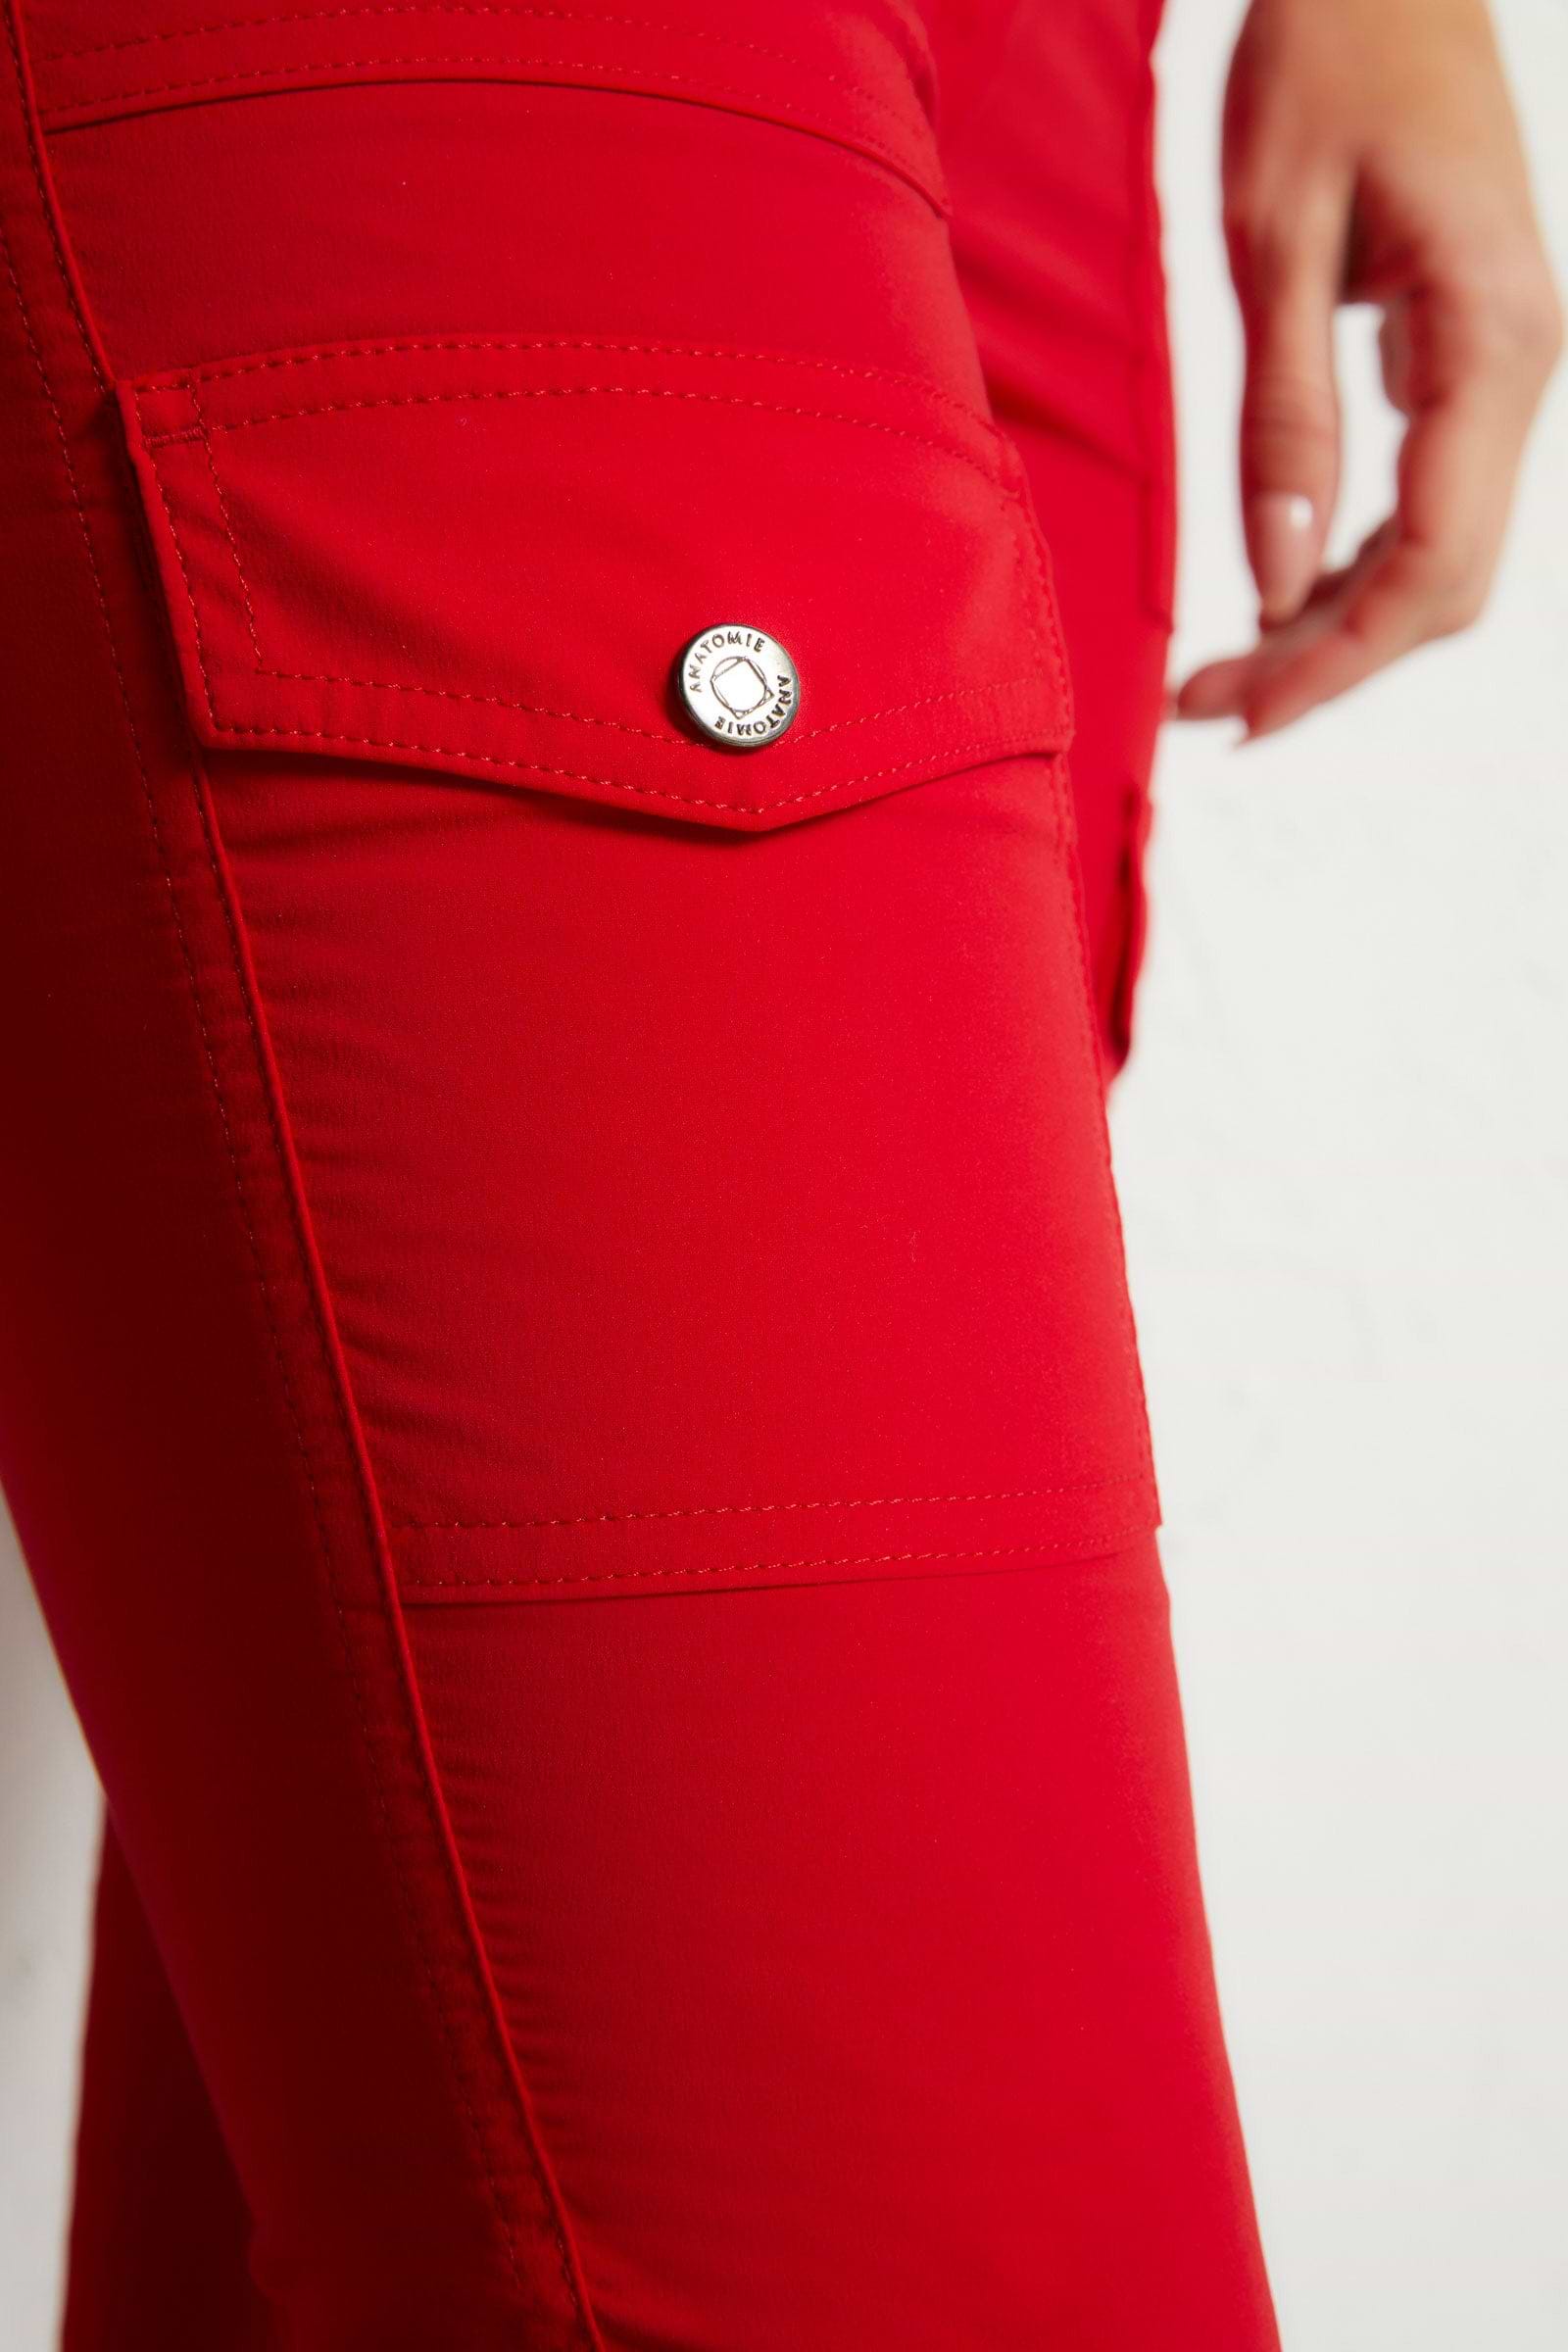 The Best Travel Cargo Pants. Leg Pocket of the Kate Skinny Cargo Pant in Atomic Red.